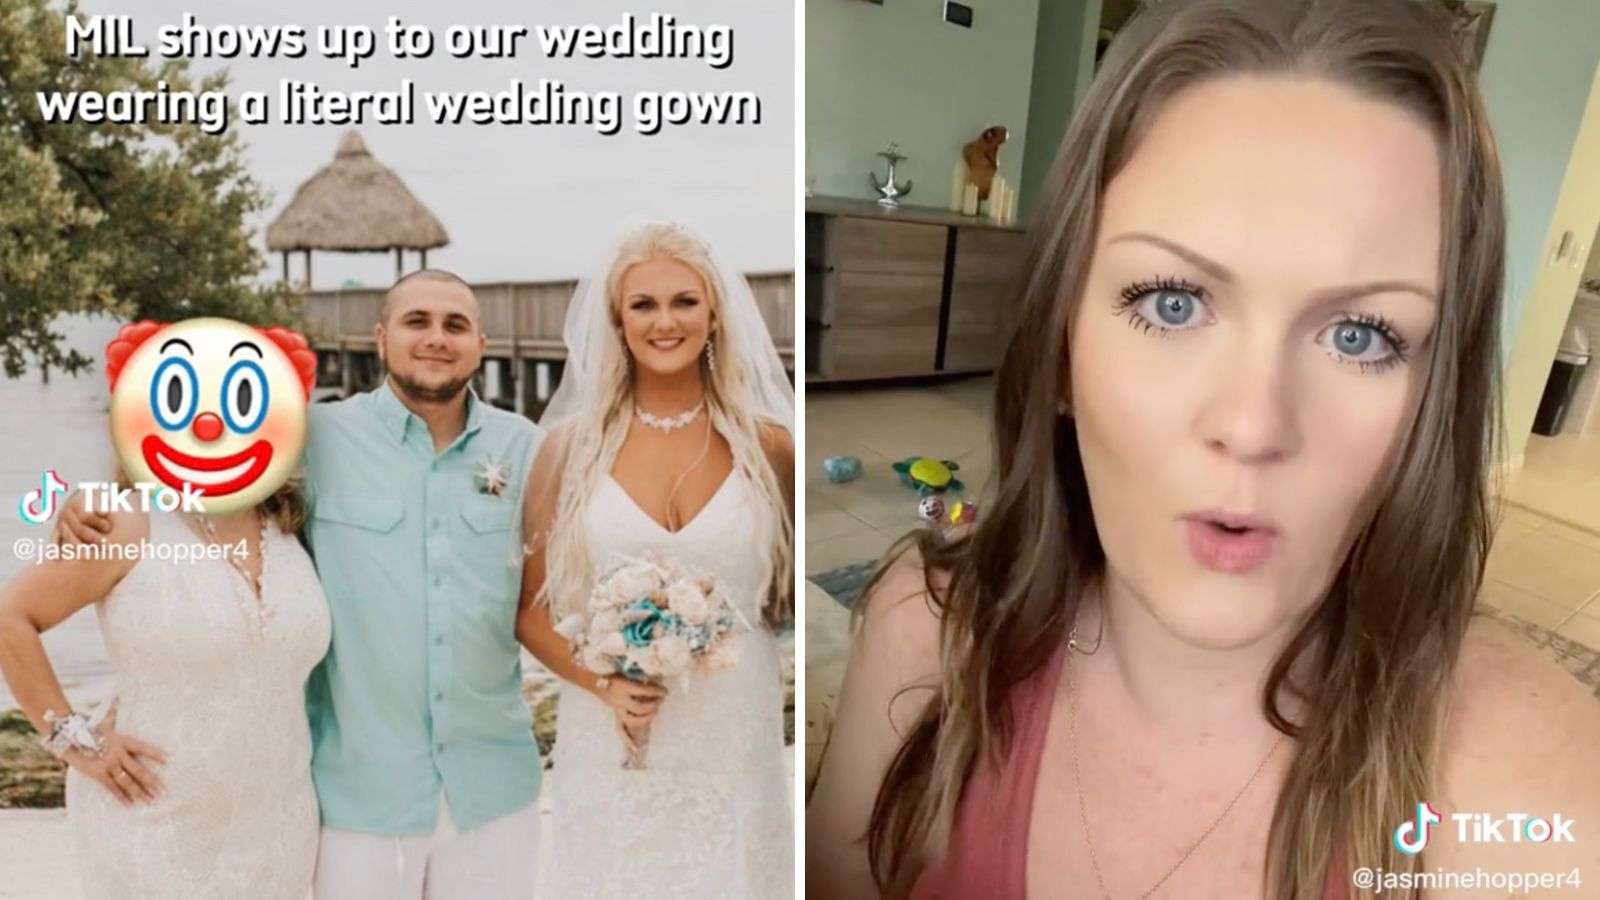 Bride blasts mother-in-law for wearing white gown to her wedding